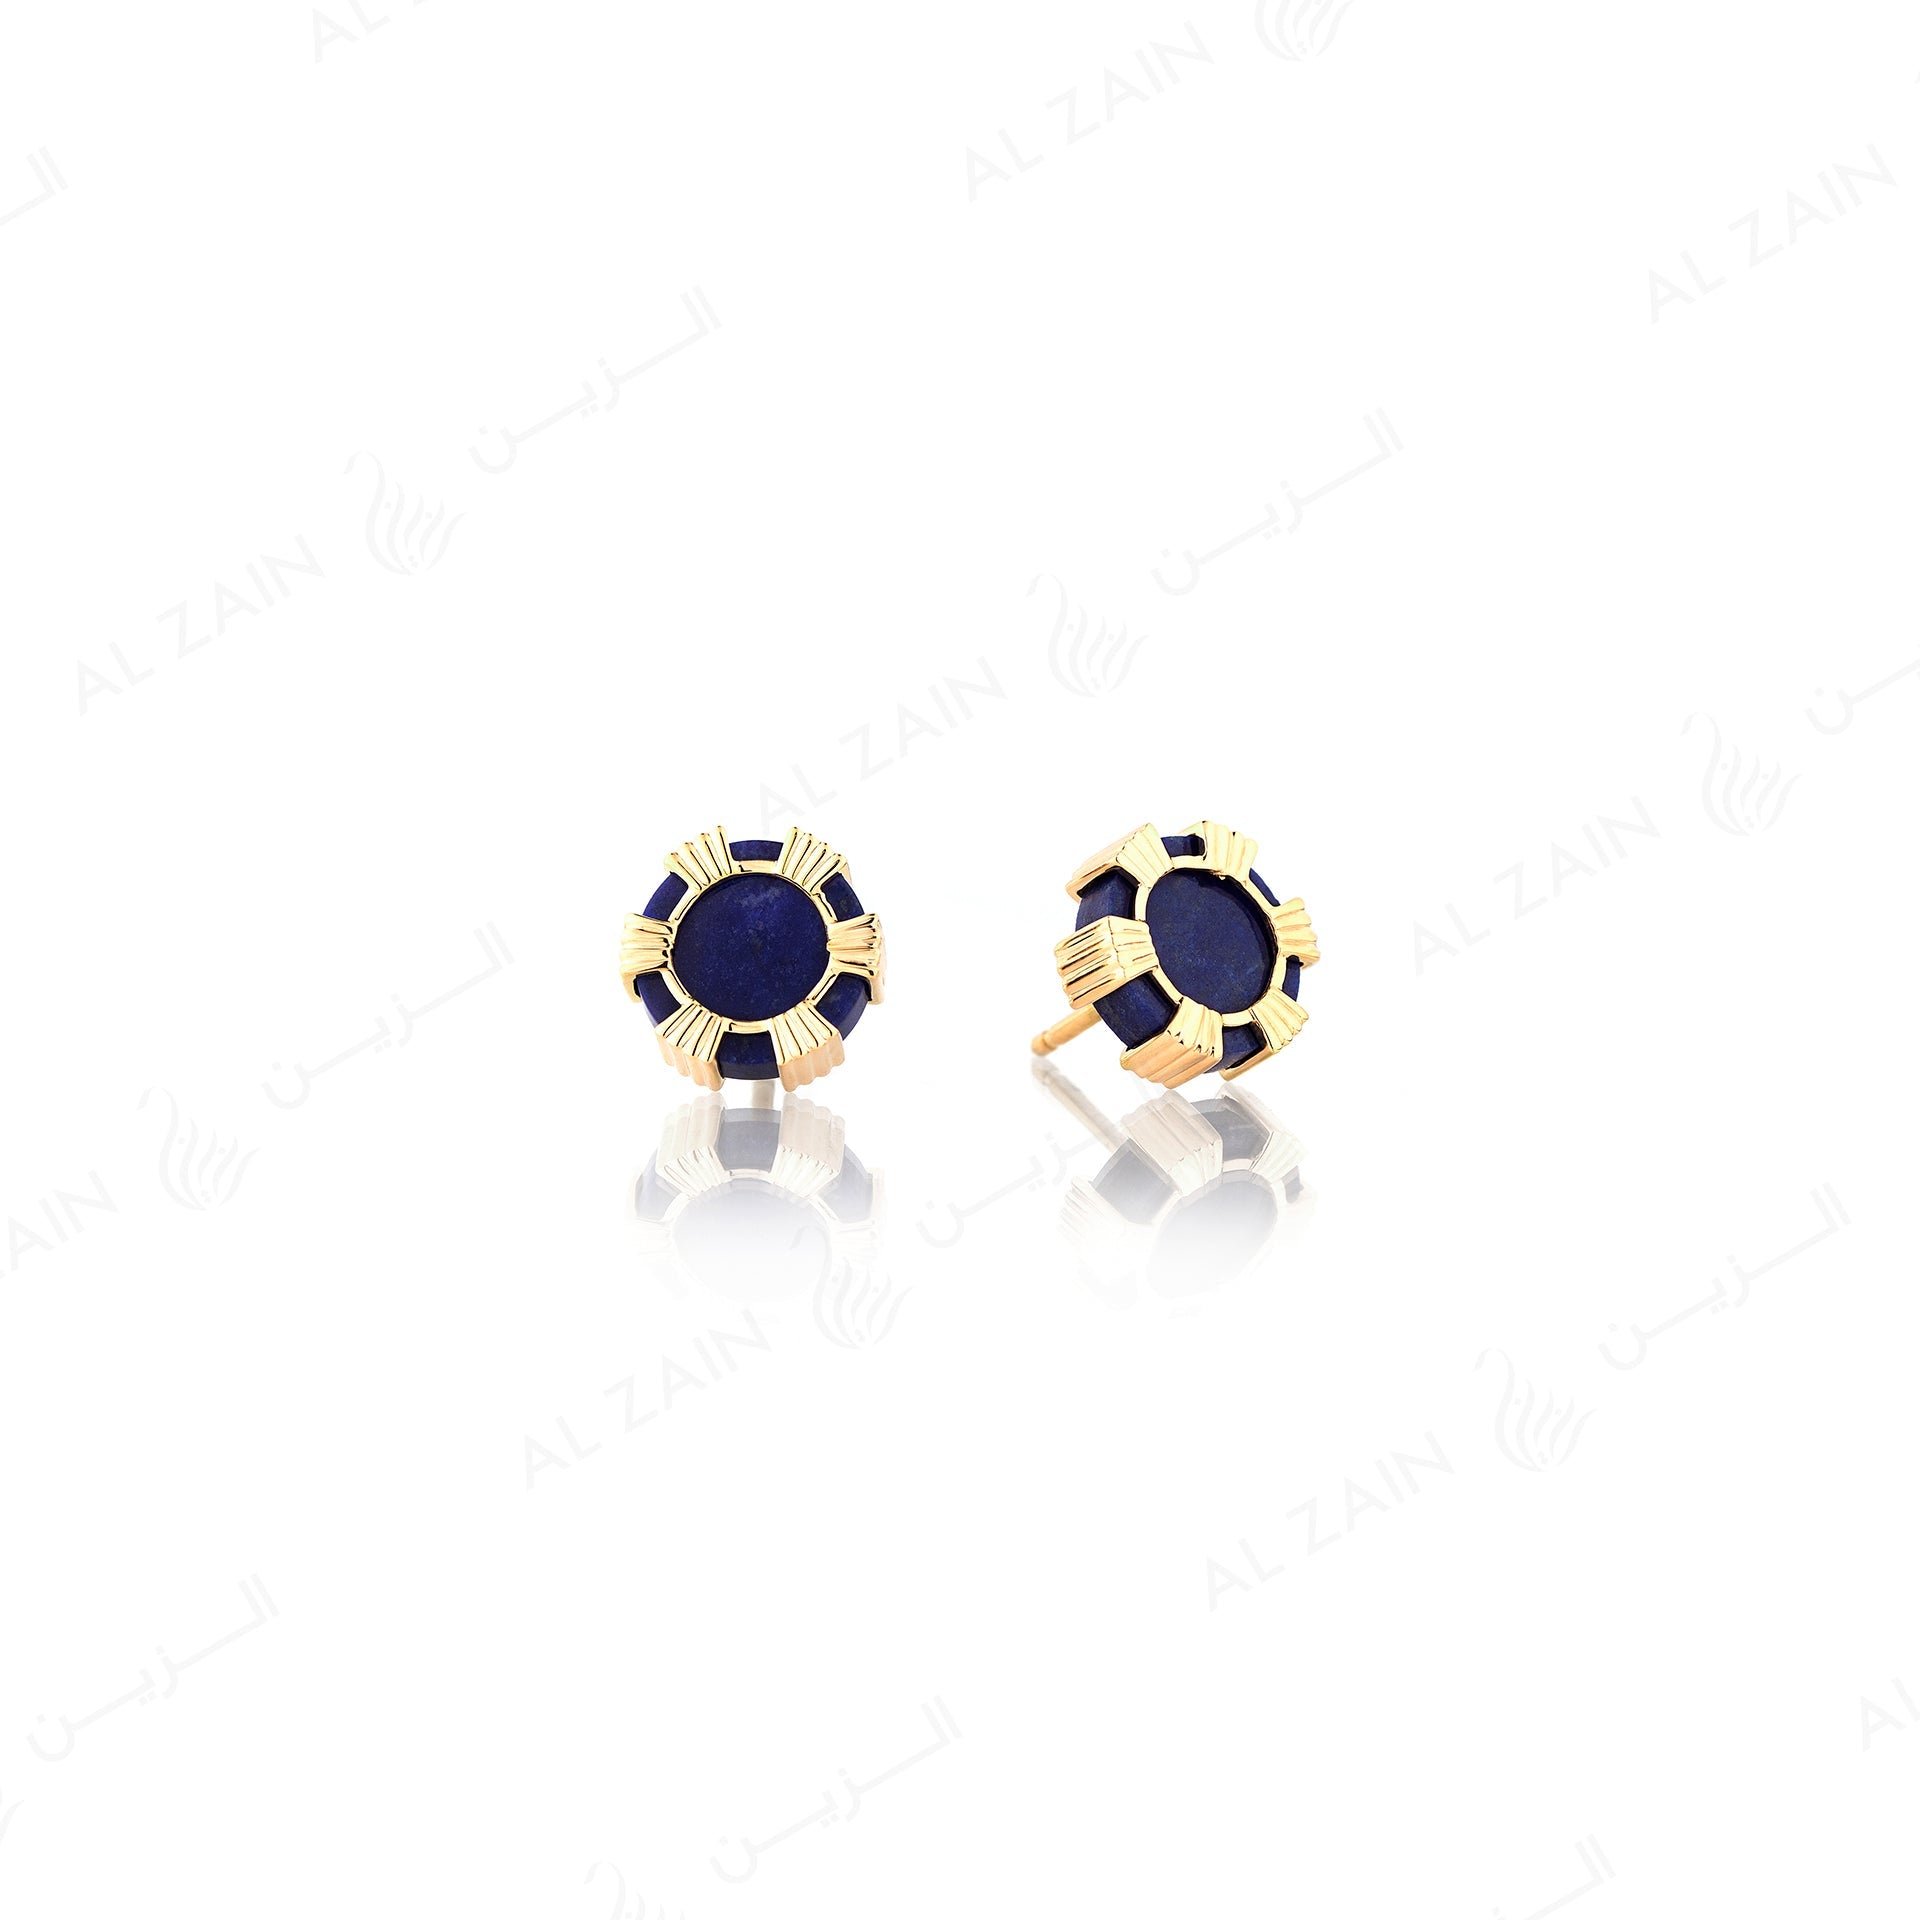 Cordoba earrings in yellow gold with lapis stones